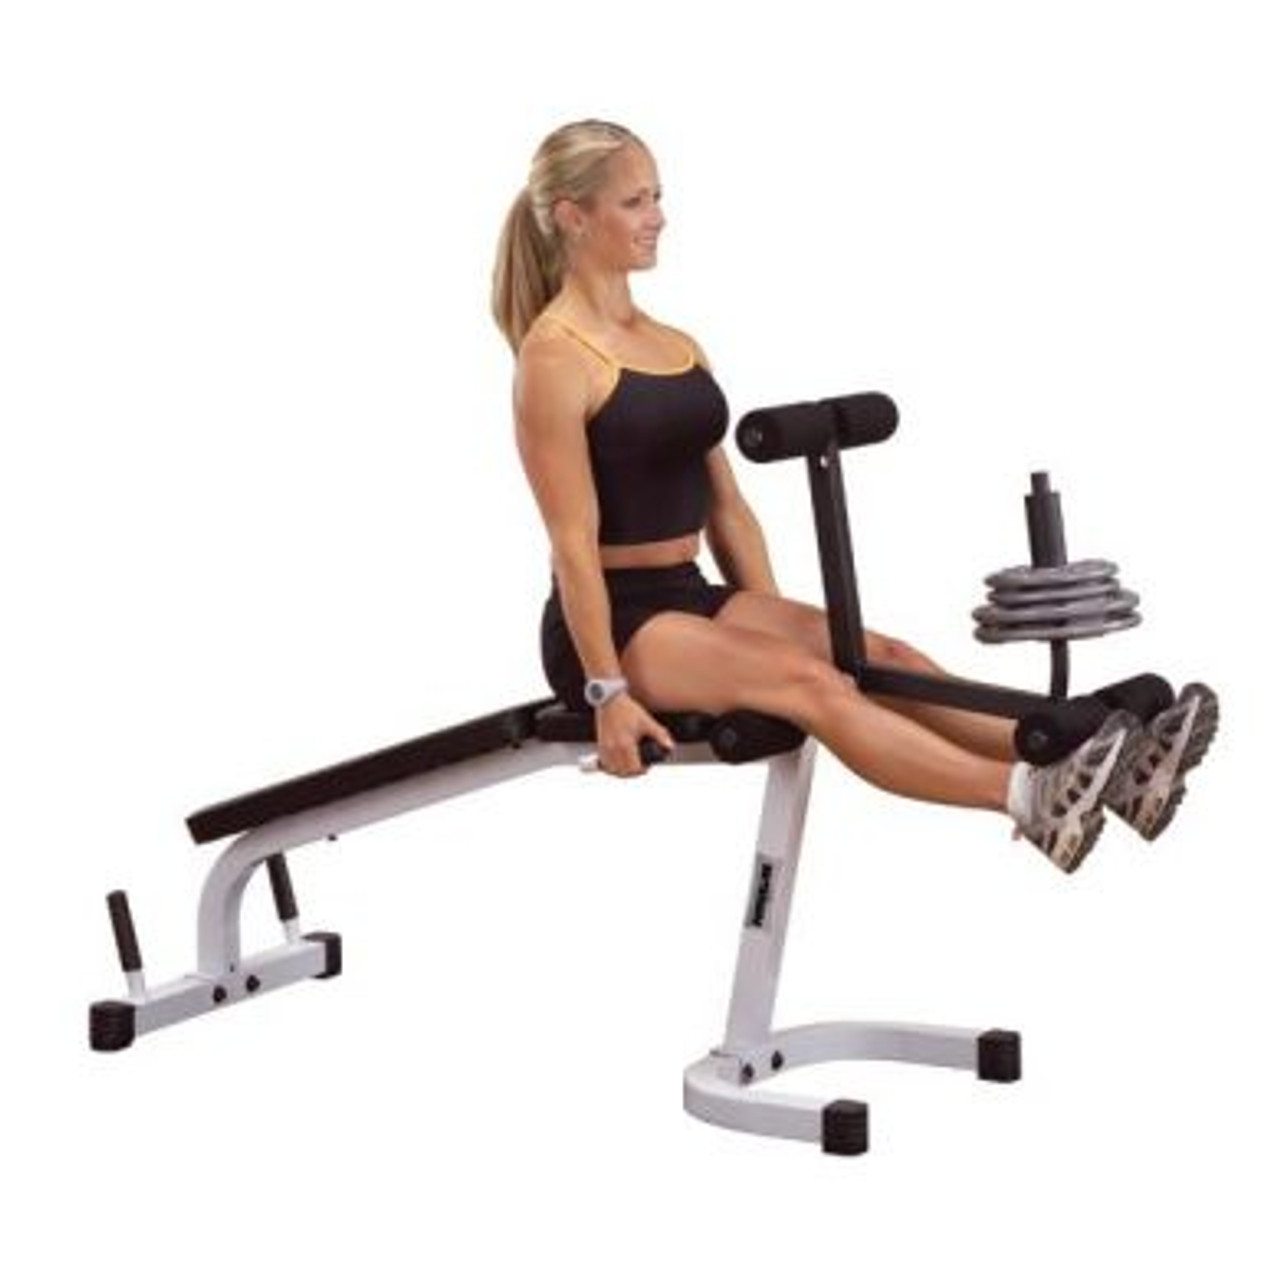 Body-Solid Powerline Leg Curl and Extension Machine - Ideal for